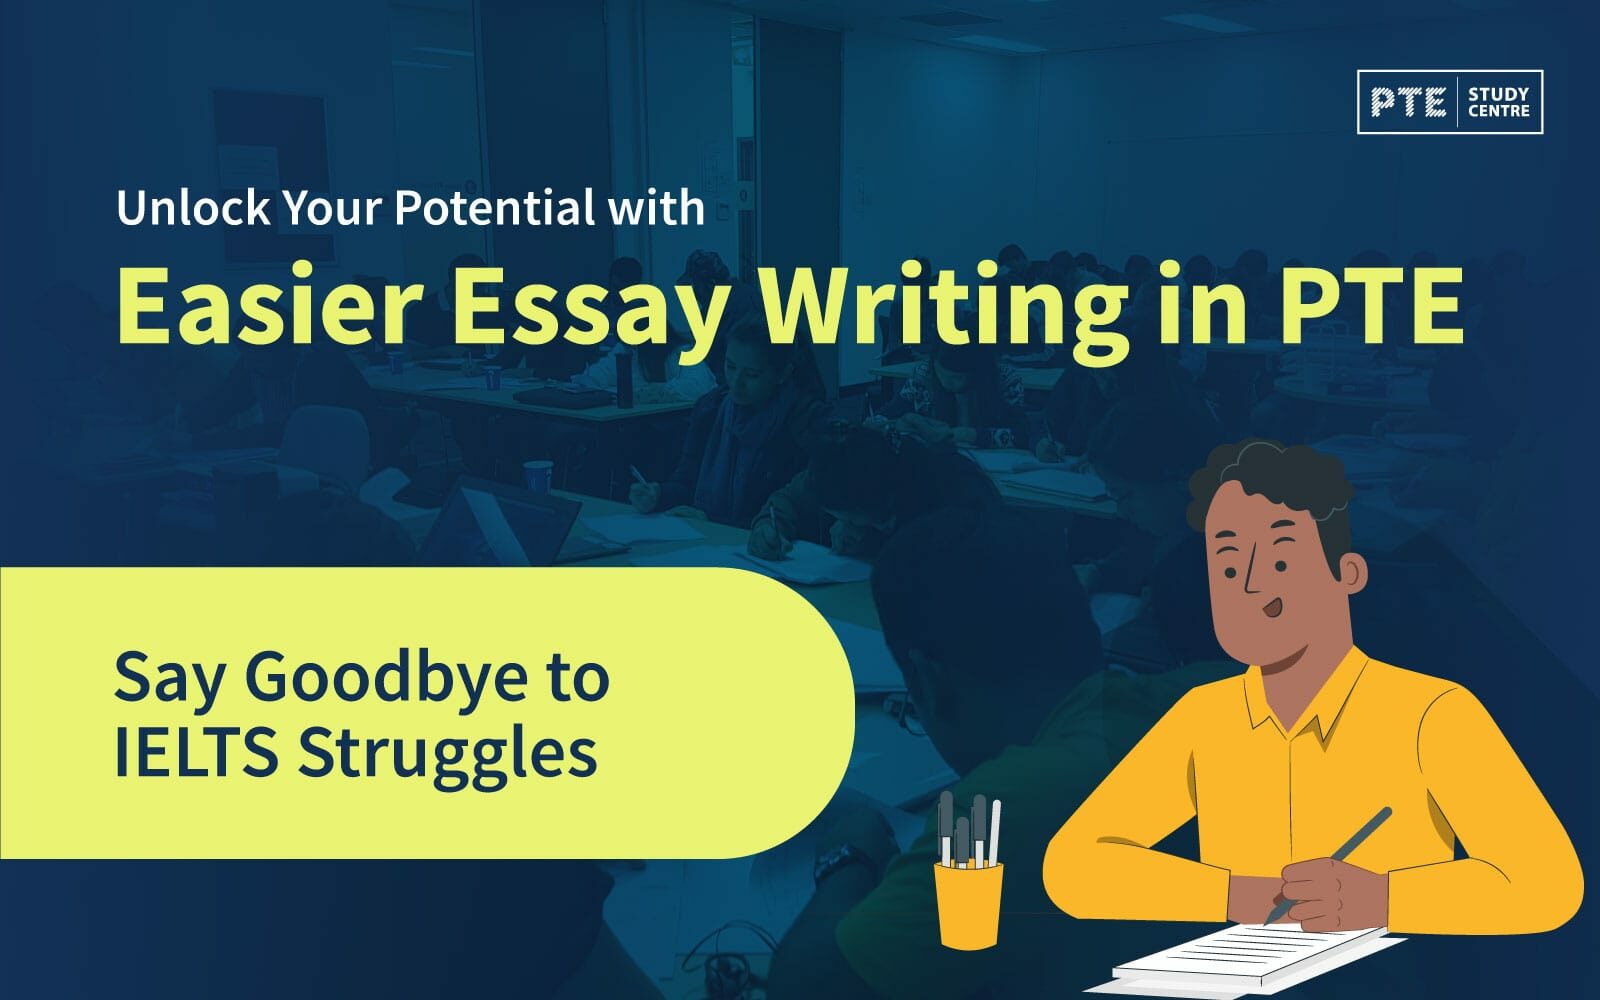 Unlock Your Potential with Easier Essay Writing in PTE: Say Goodbye to IELTS Struggles